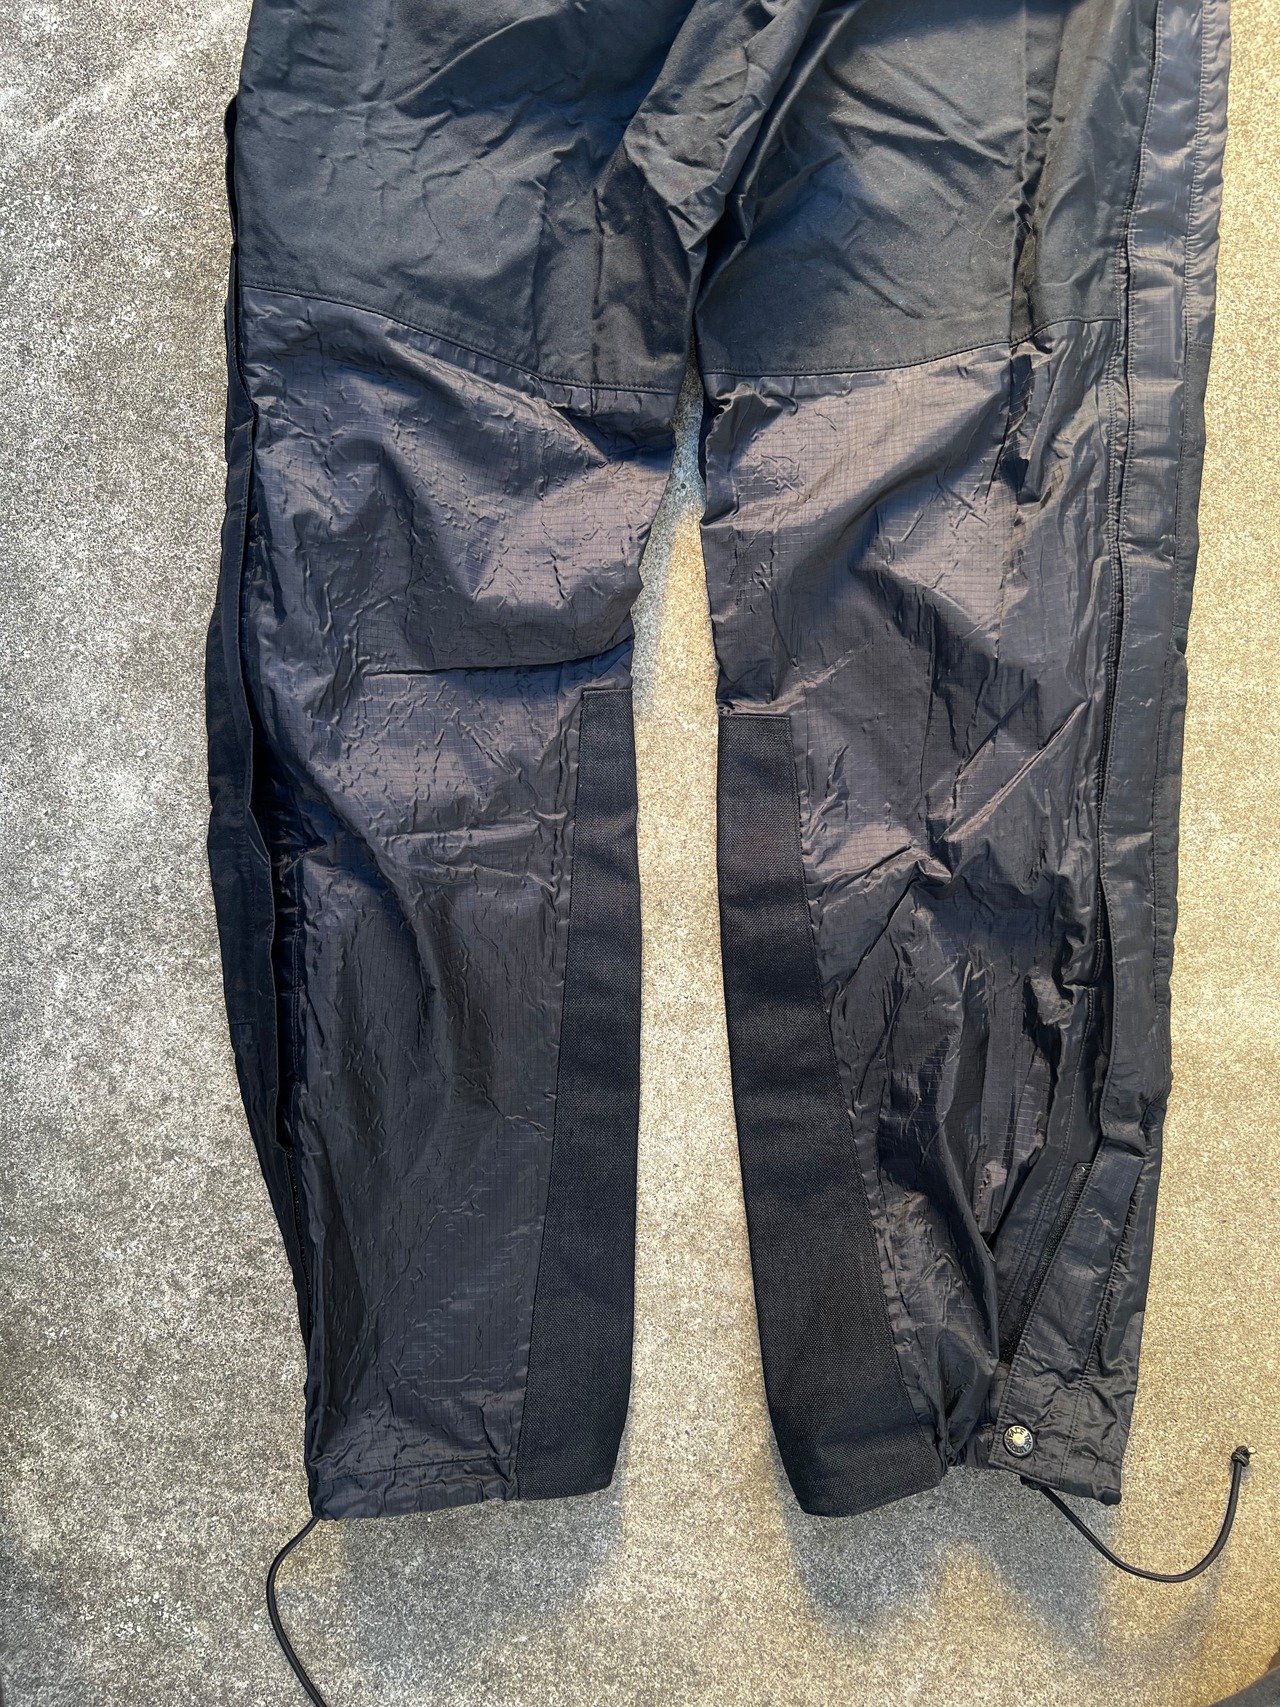 1980-90s The North Face Double Knee Shell Trouser